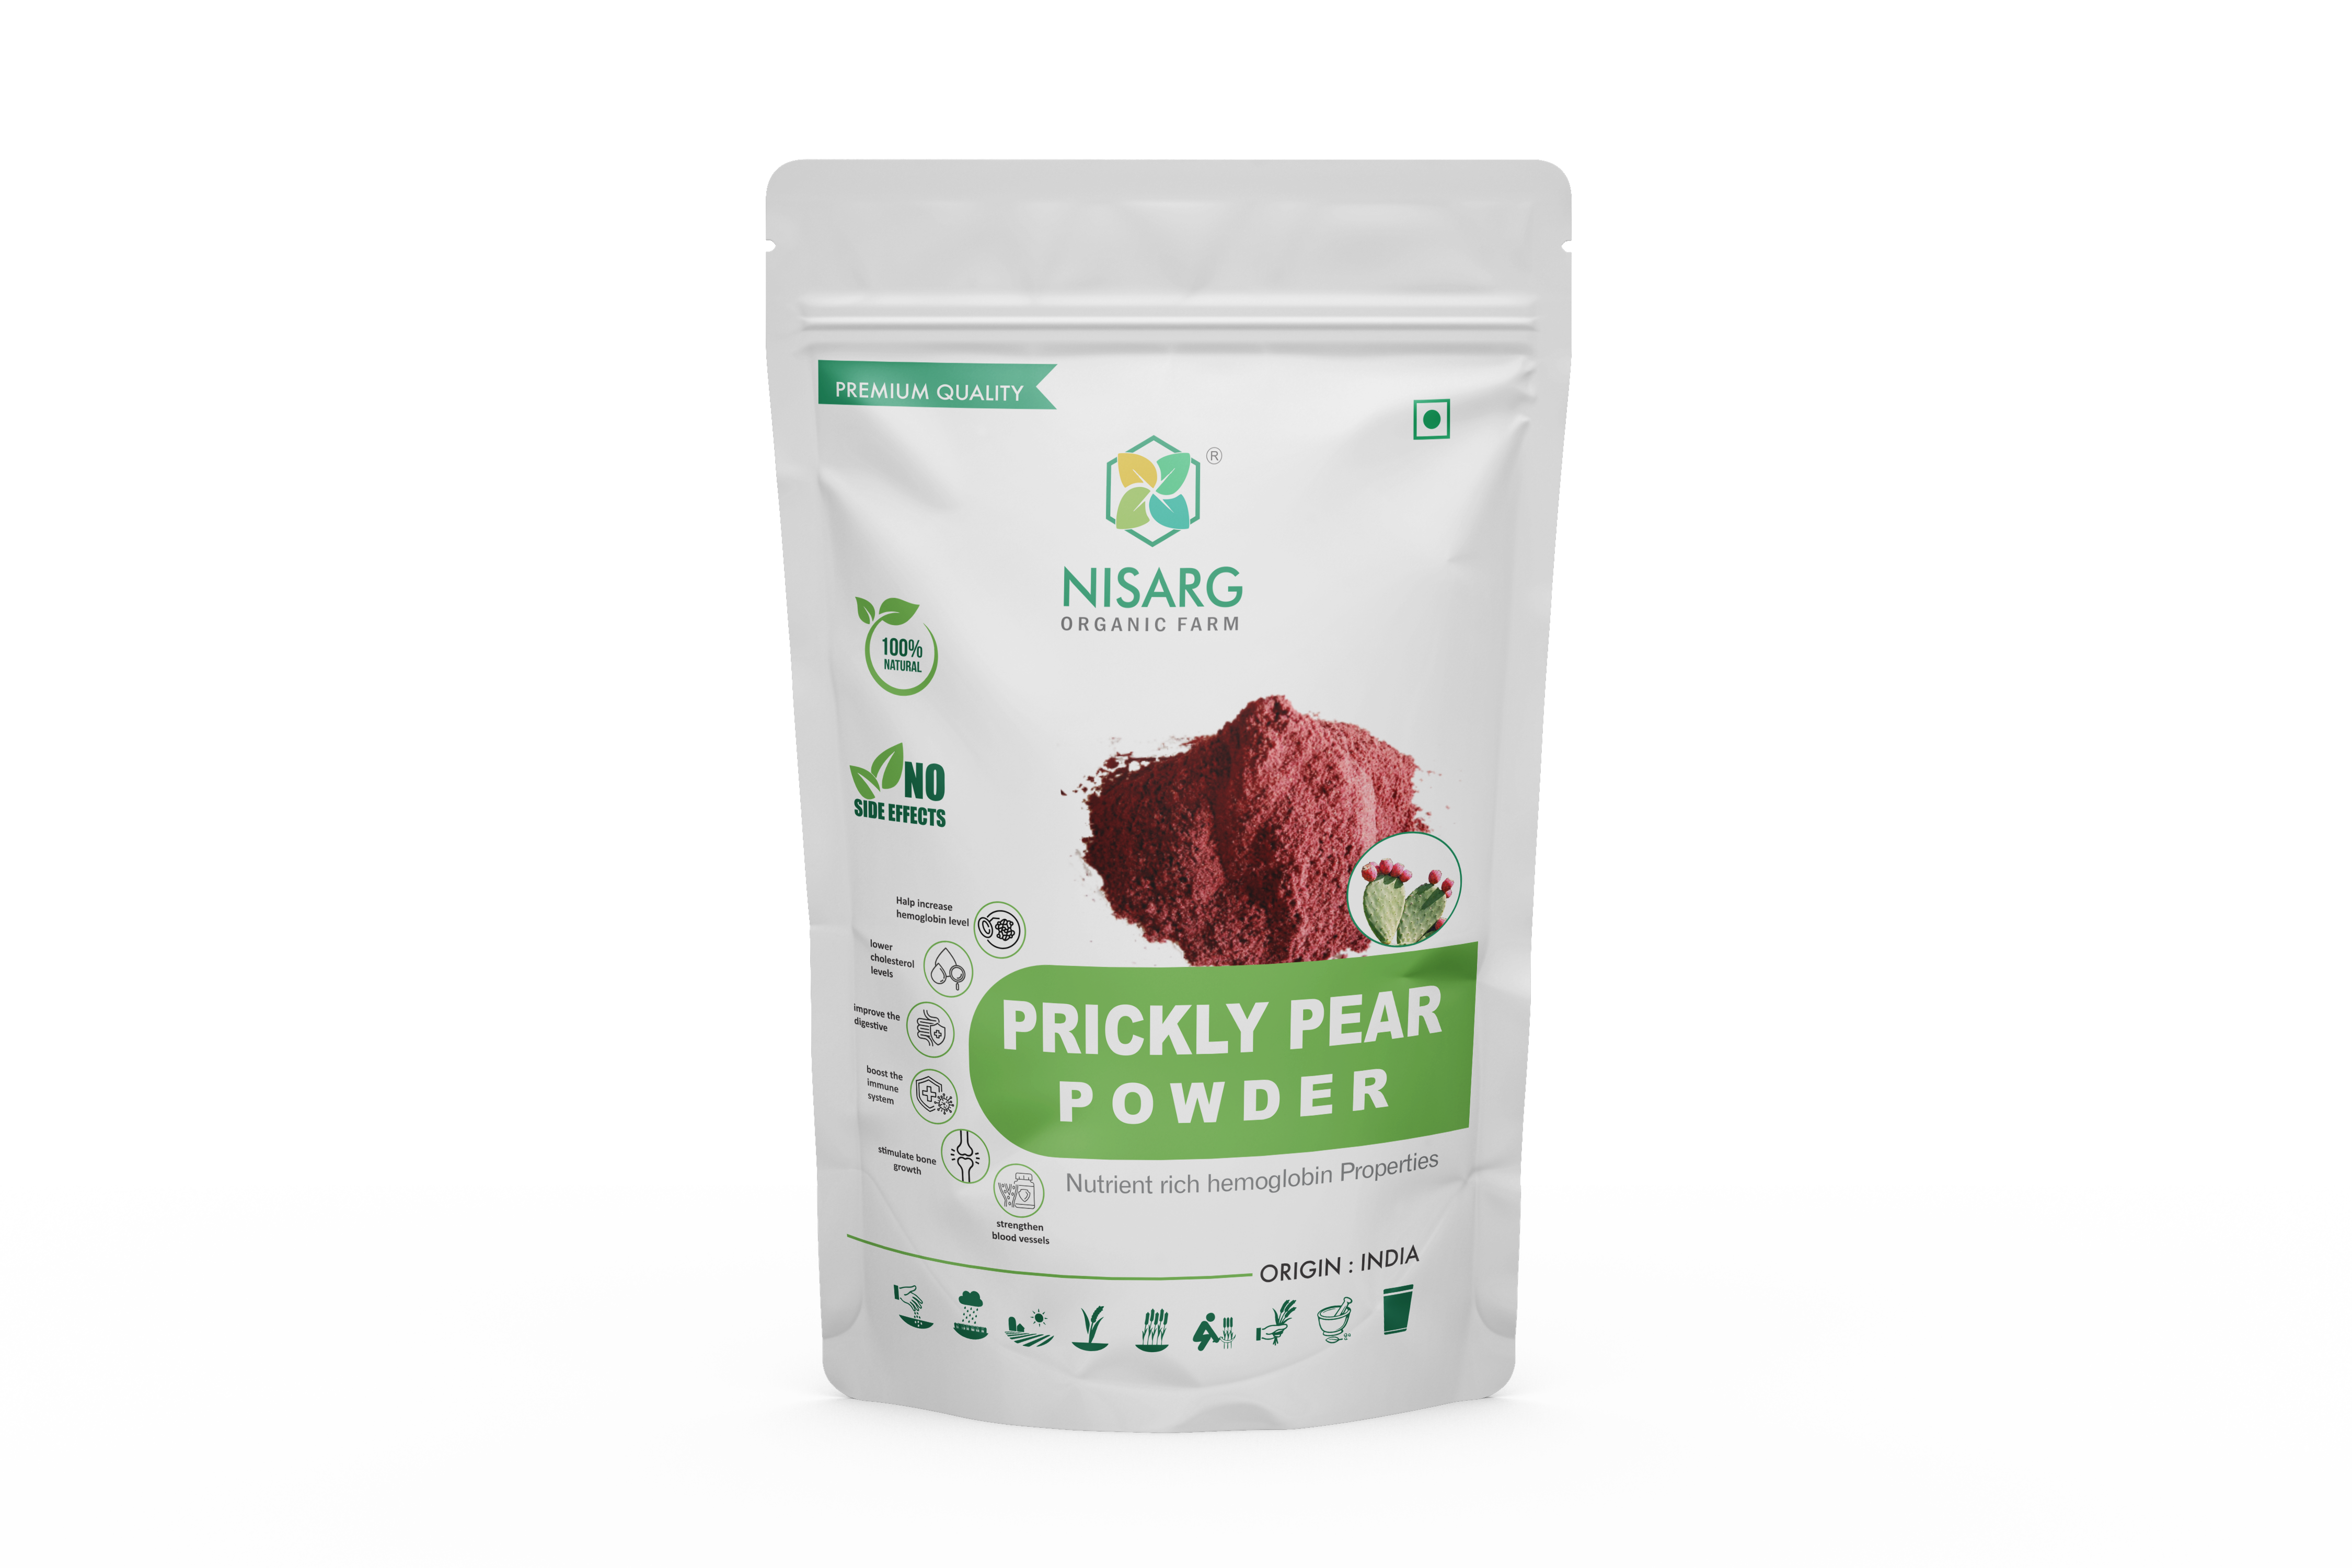 Product: Nisarg Prickly Pear Powder